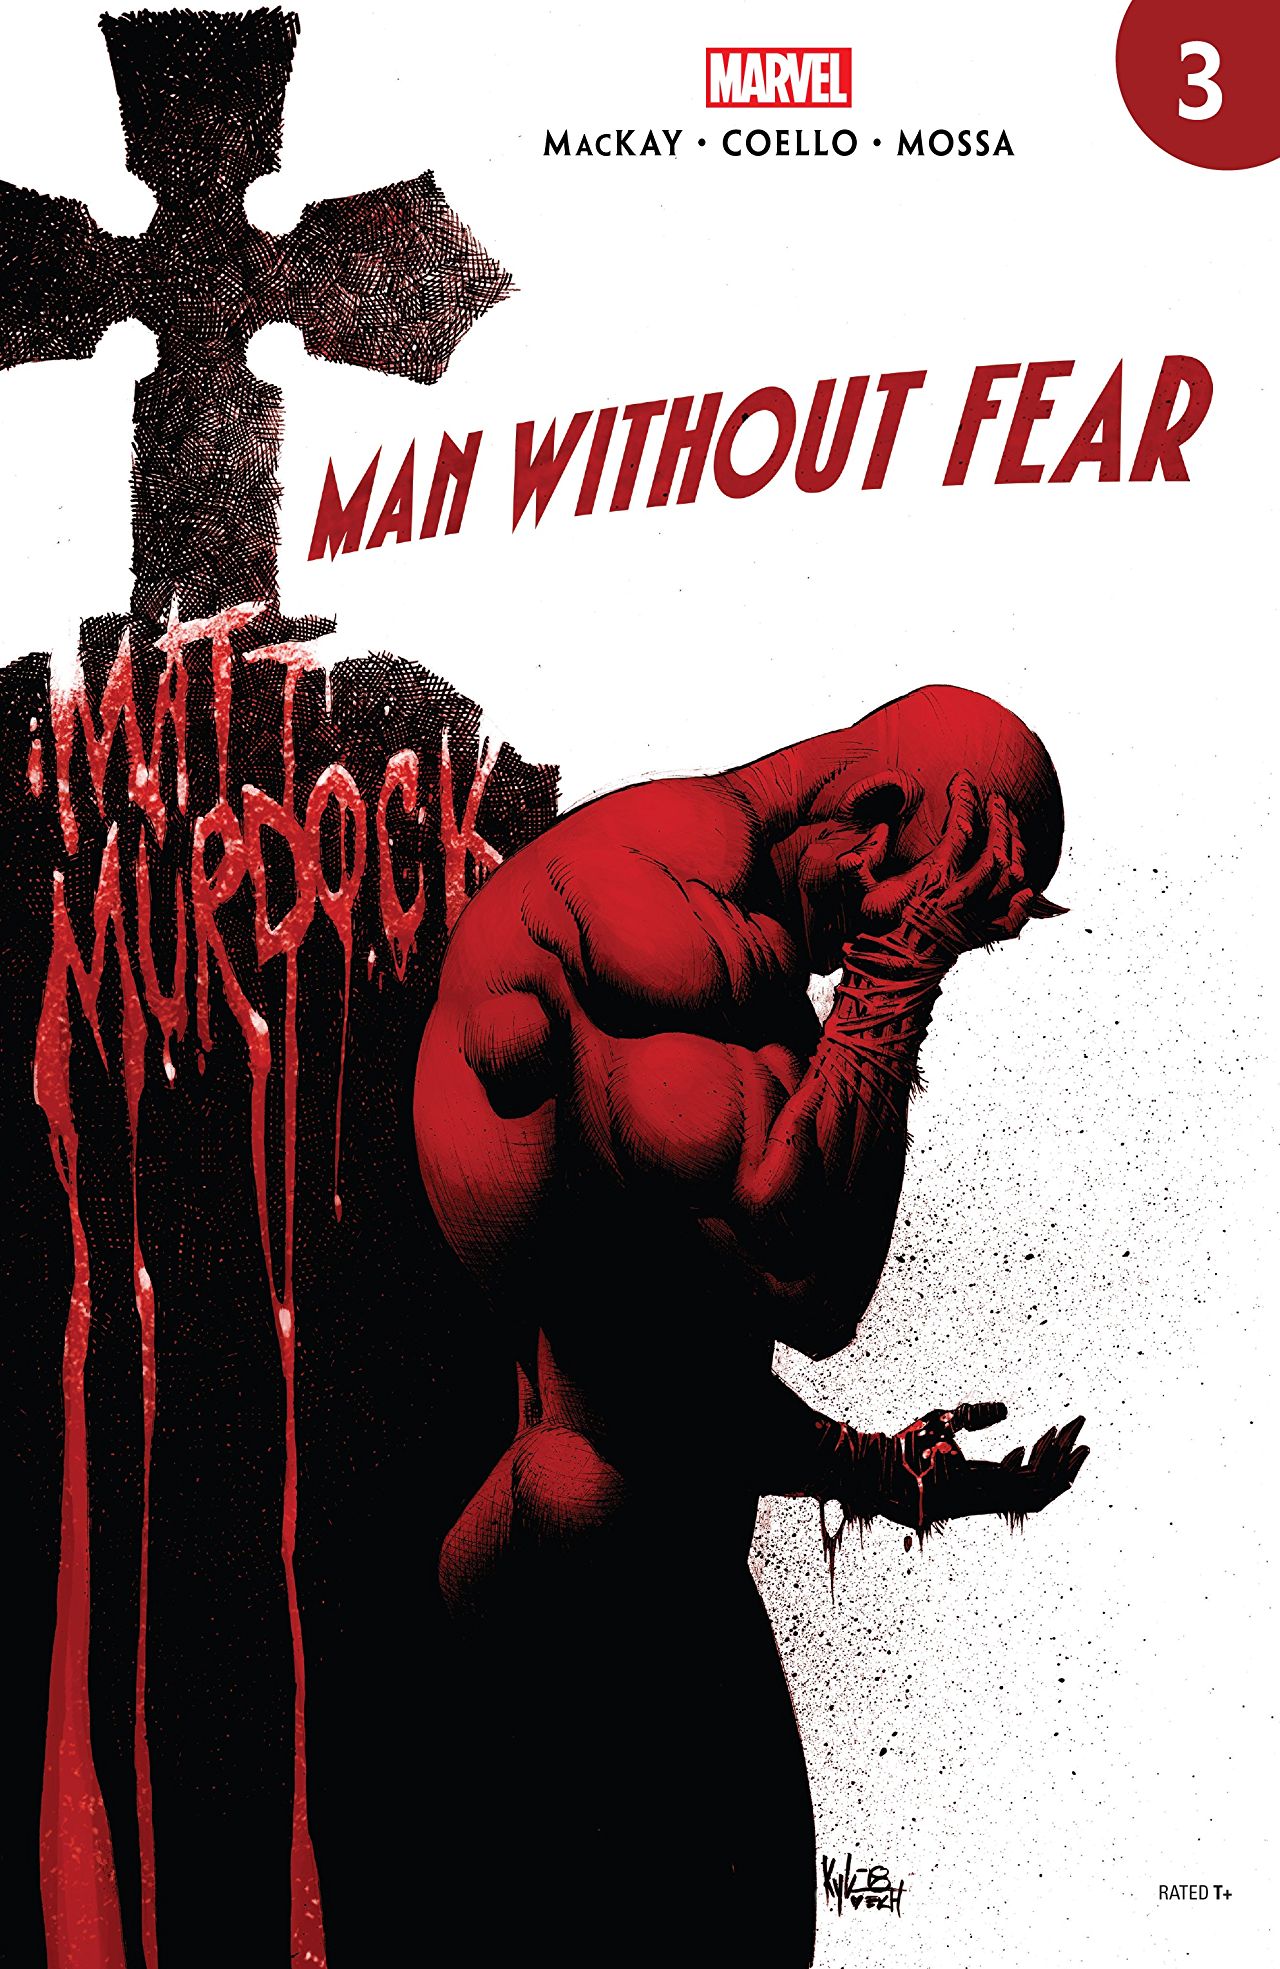 Marvel Preview: Man Without Fear #3